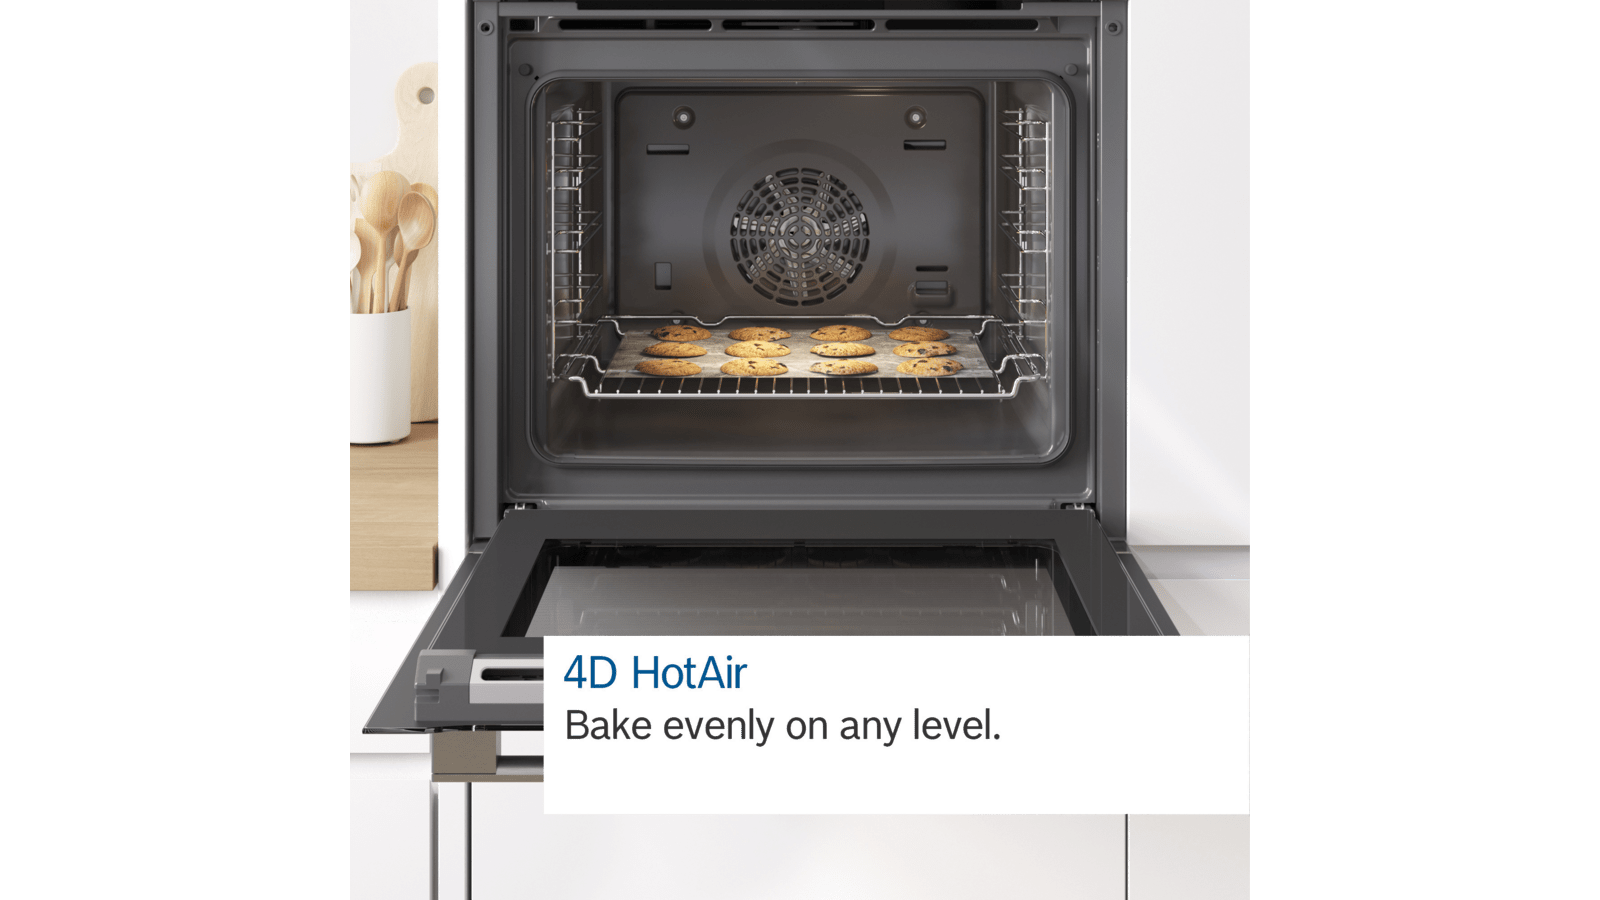 Bosch Serie 8 Oven with Steamer CSG656BS7B